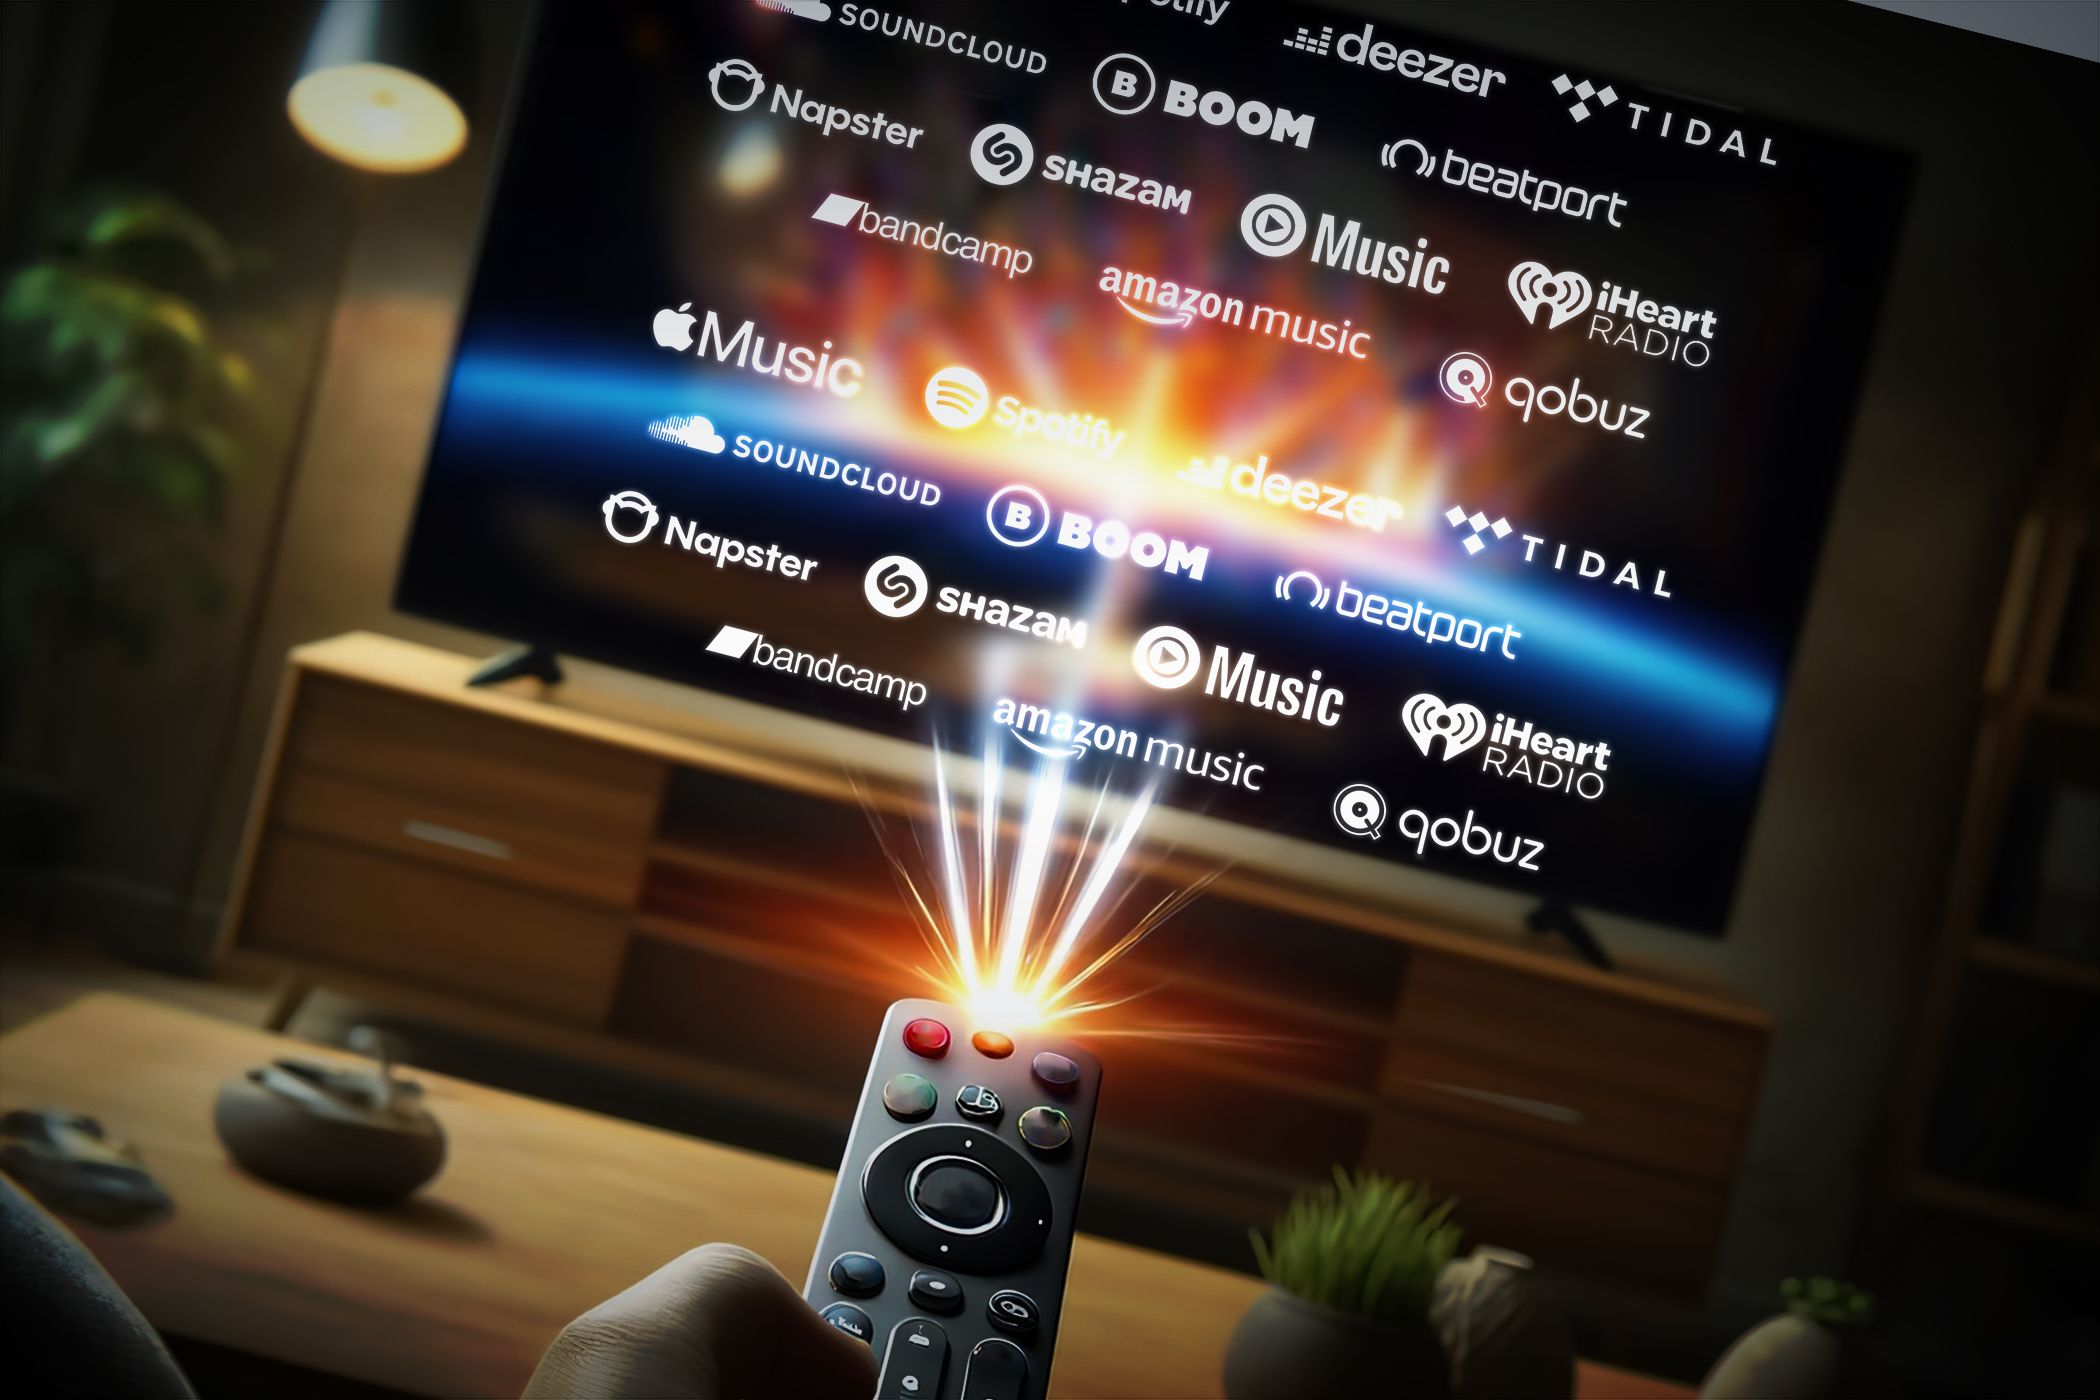 A smart TV displaying different streaming logos and person holding a remote